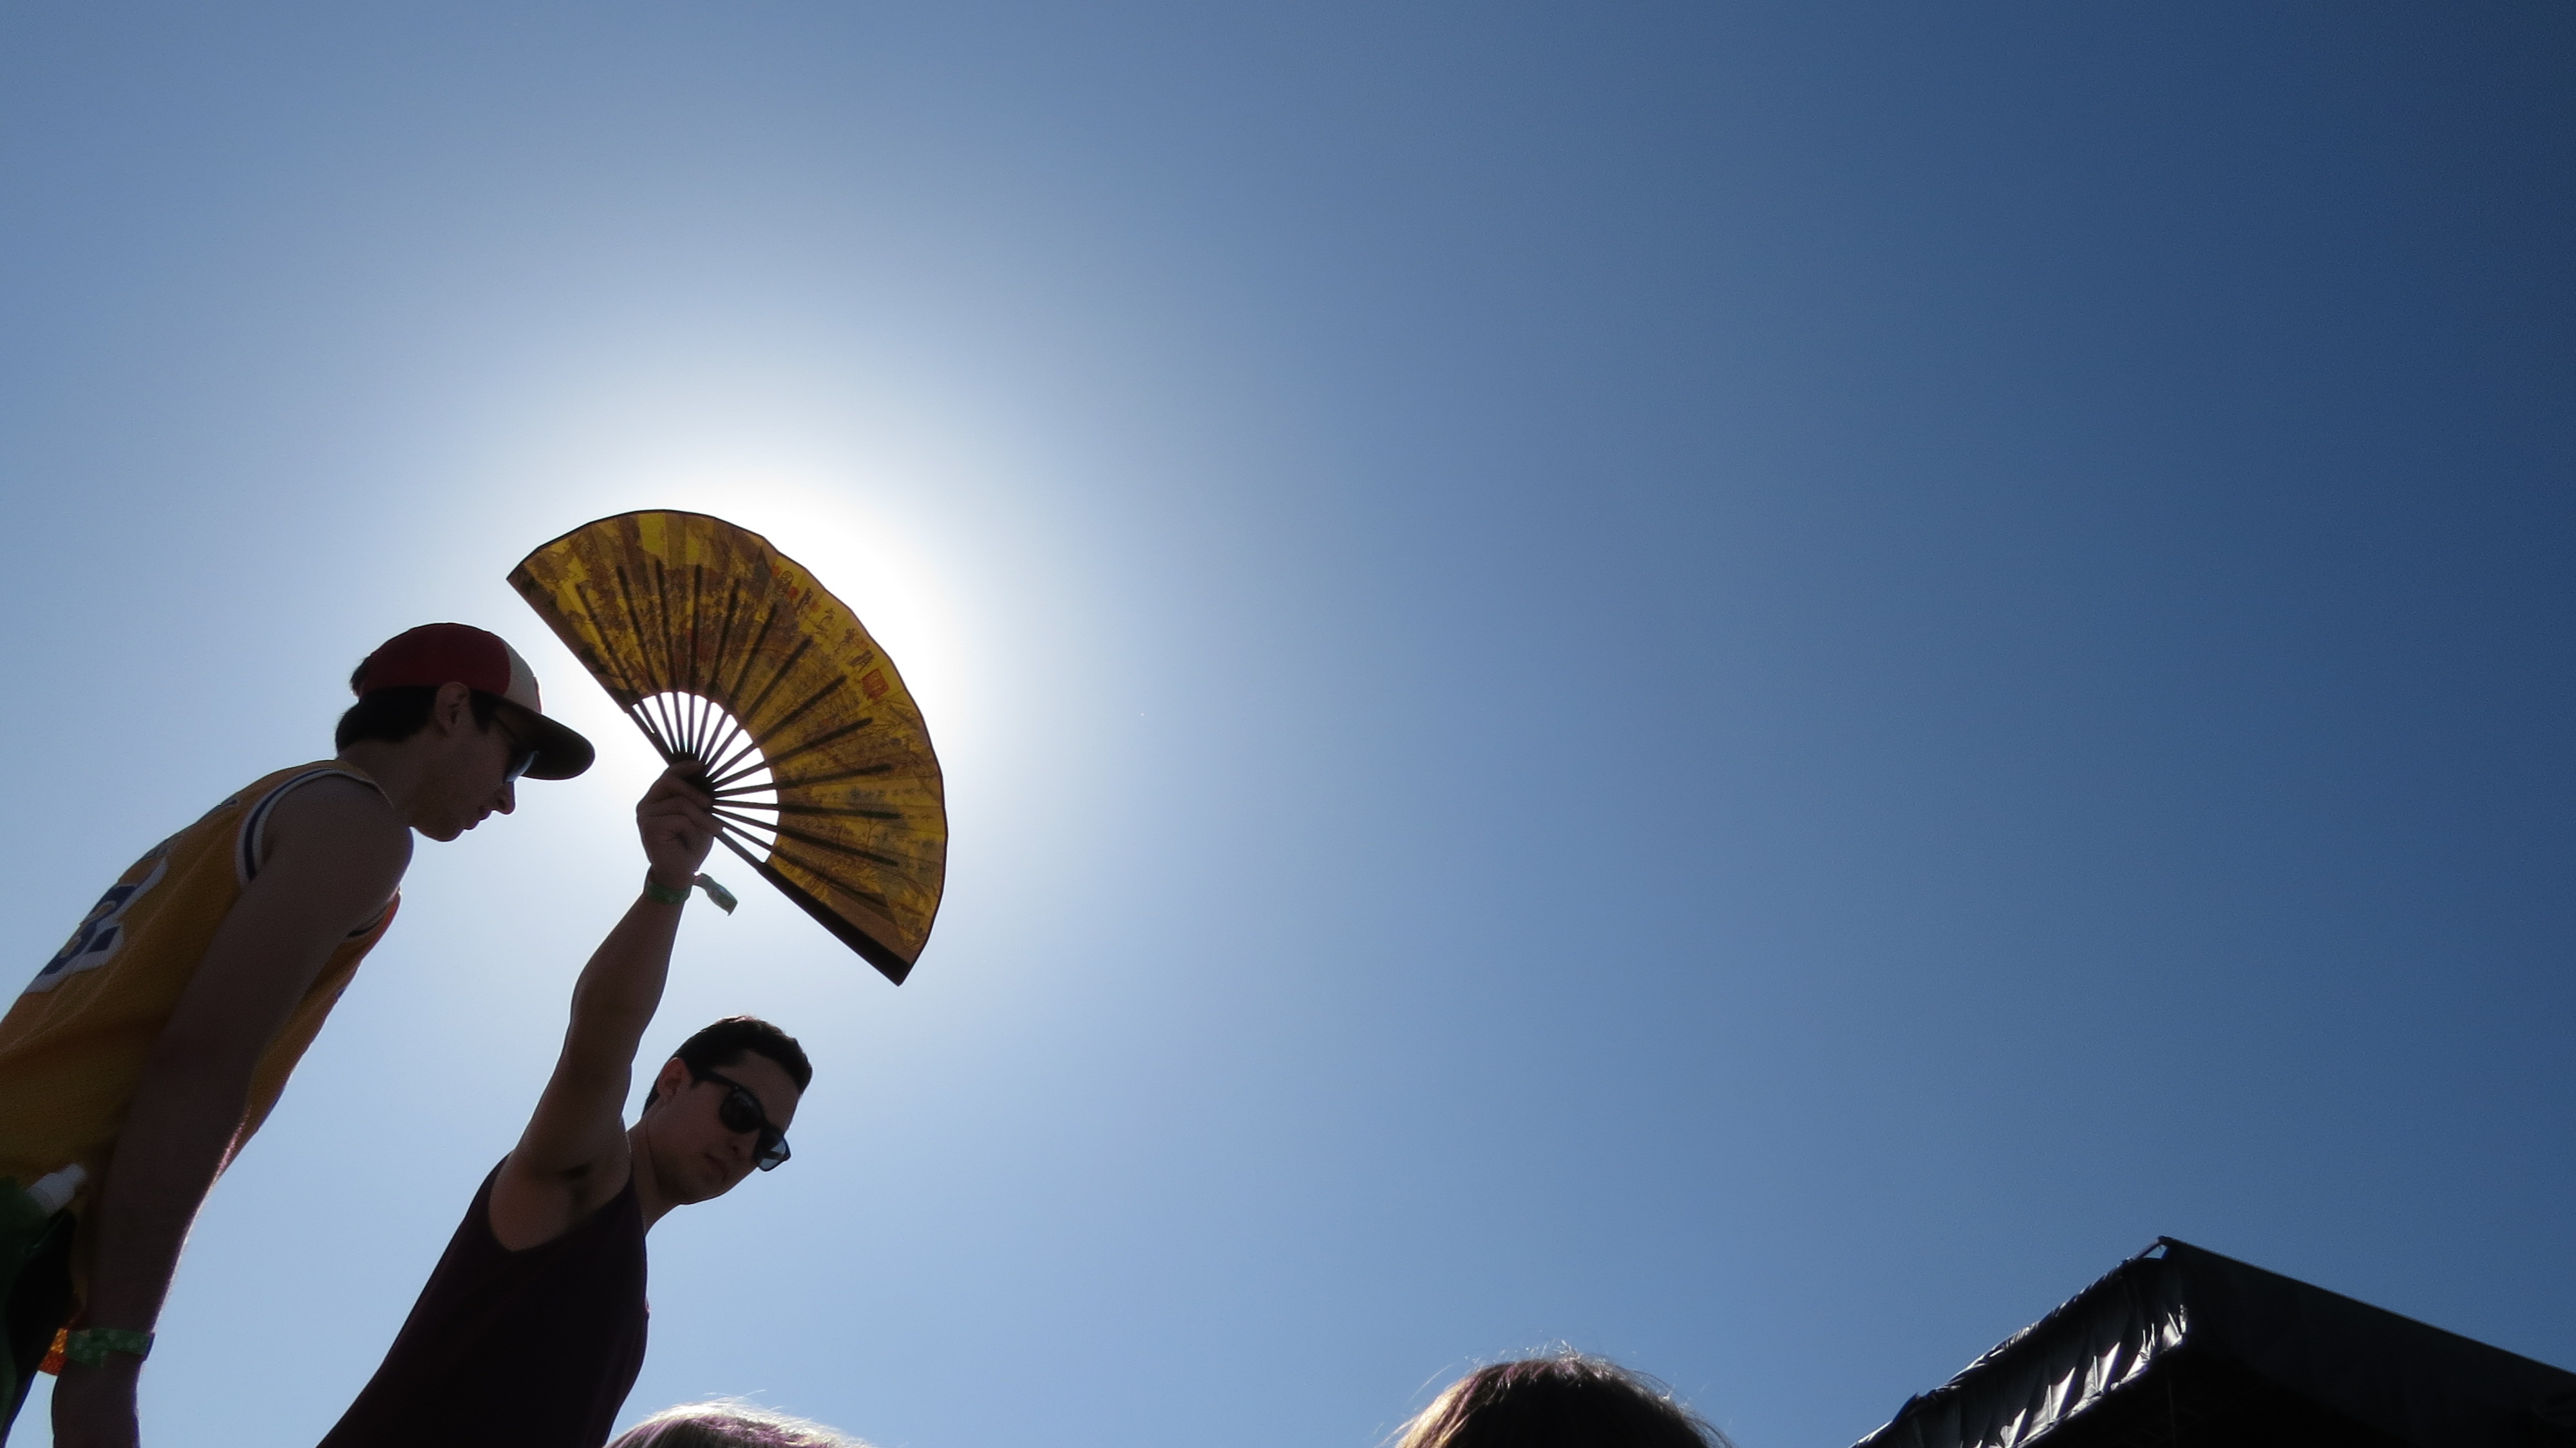 Coachella 2013 | A Love Letter from a First Time Festival-Goer